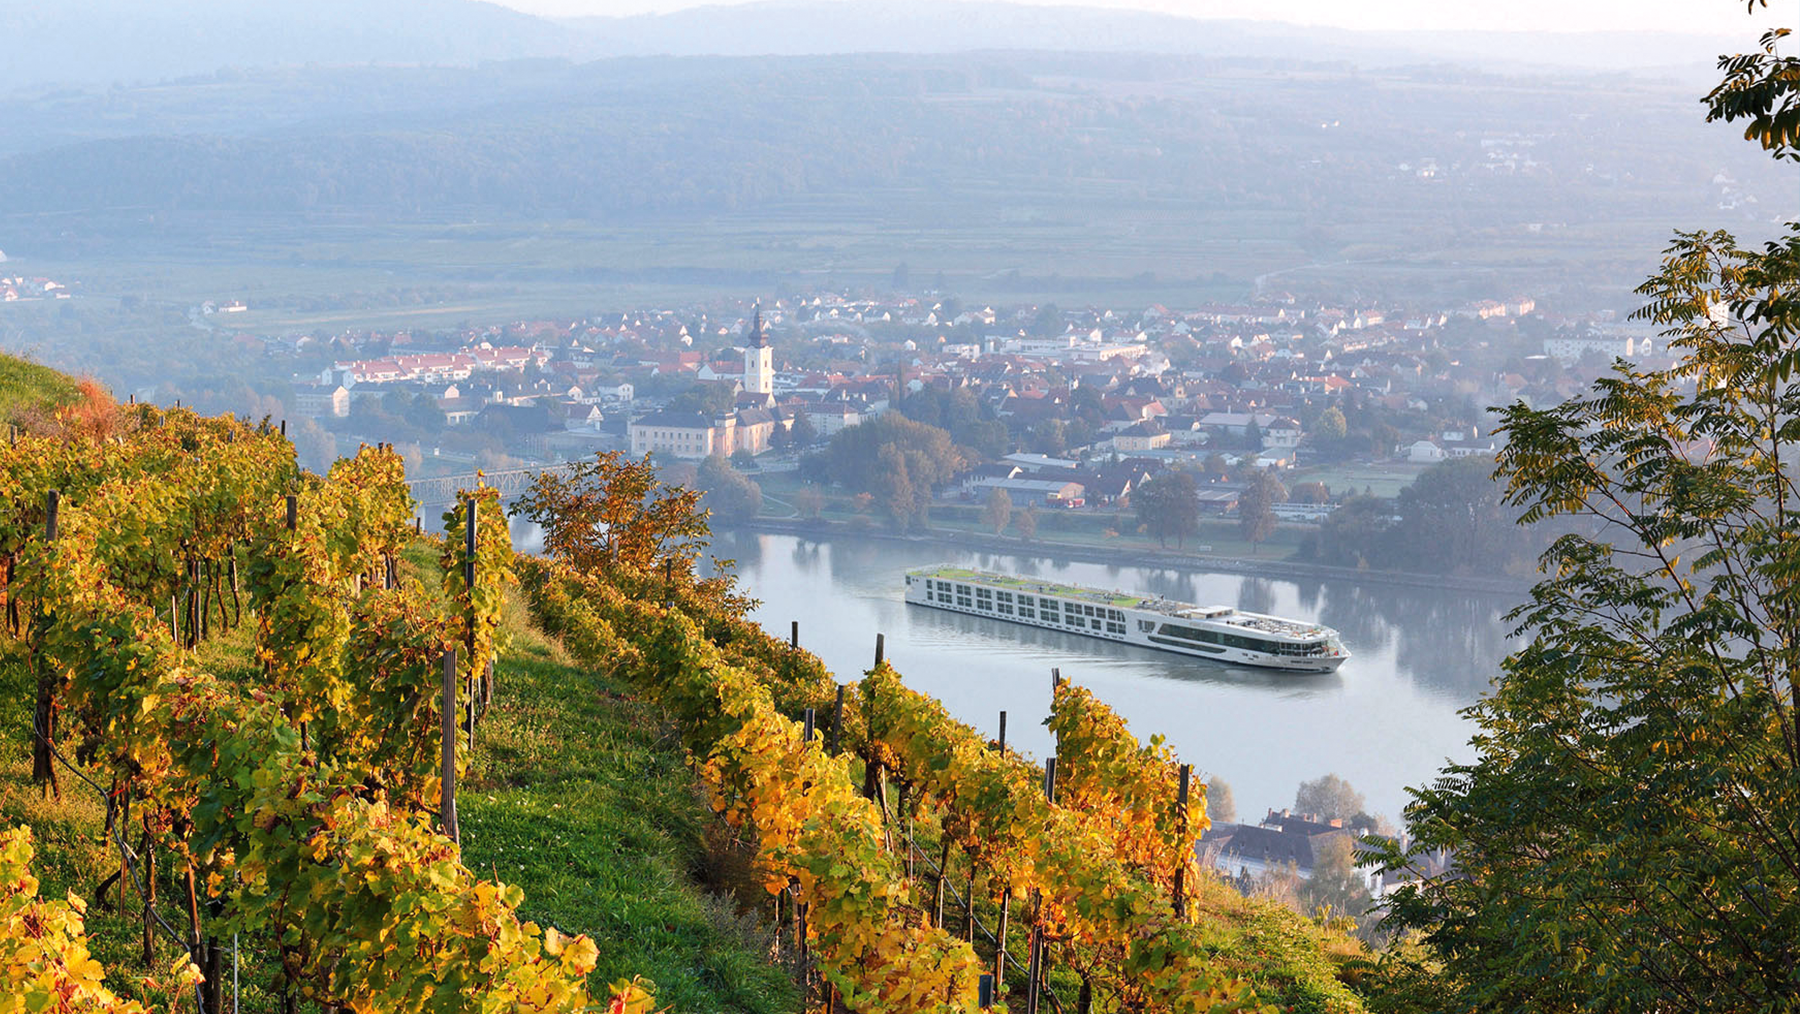 A Scenic ship on the Wachau Valley